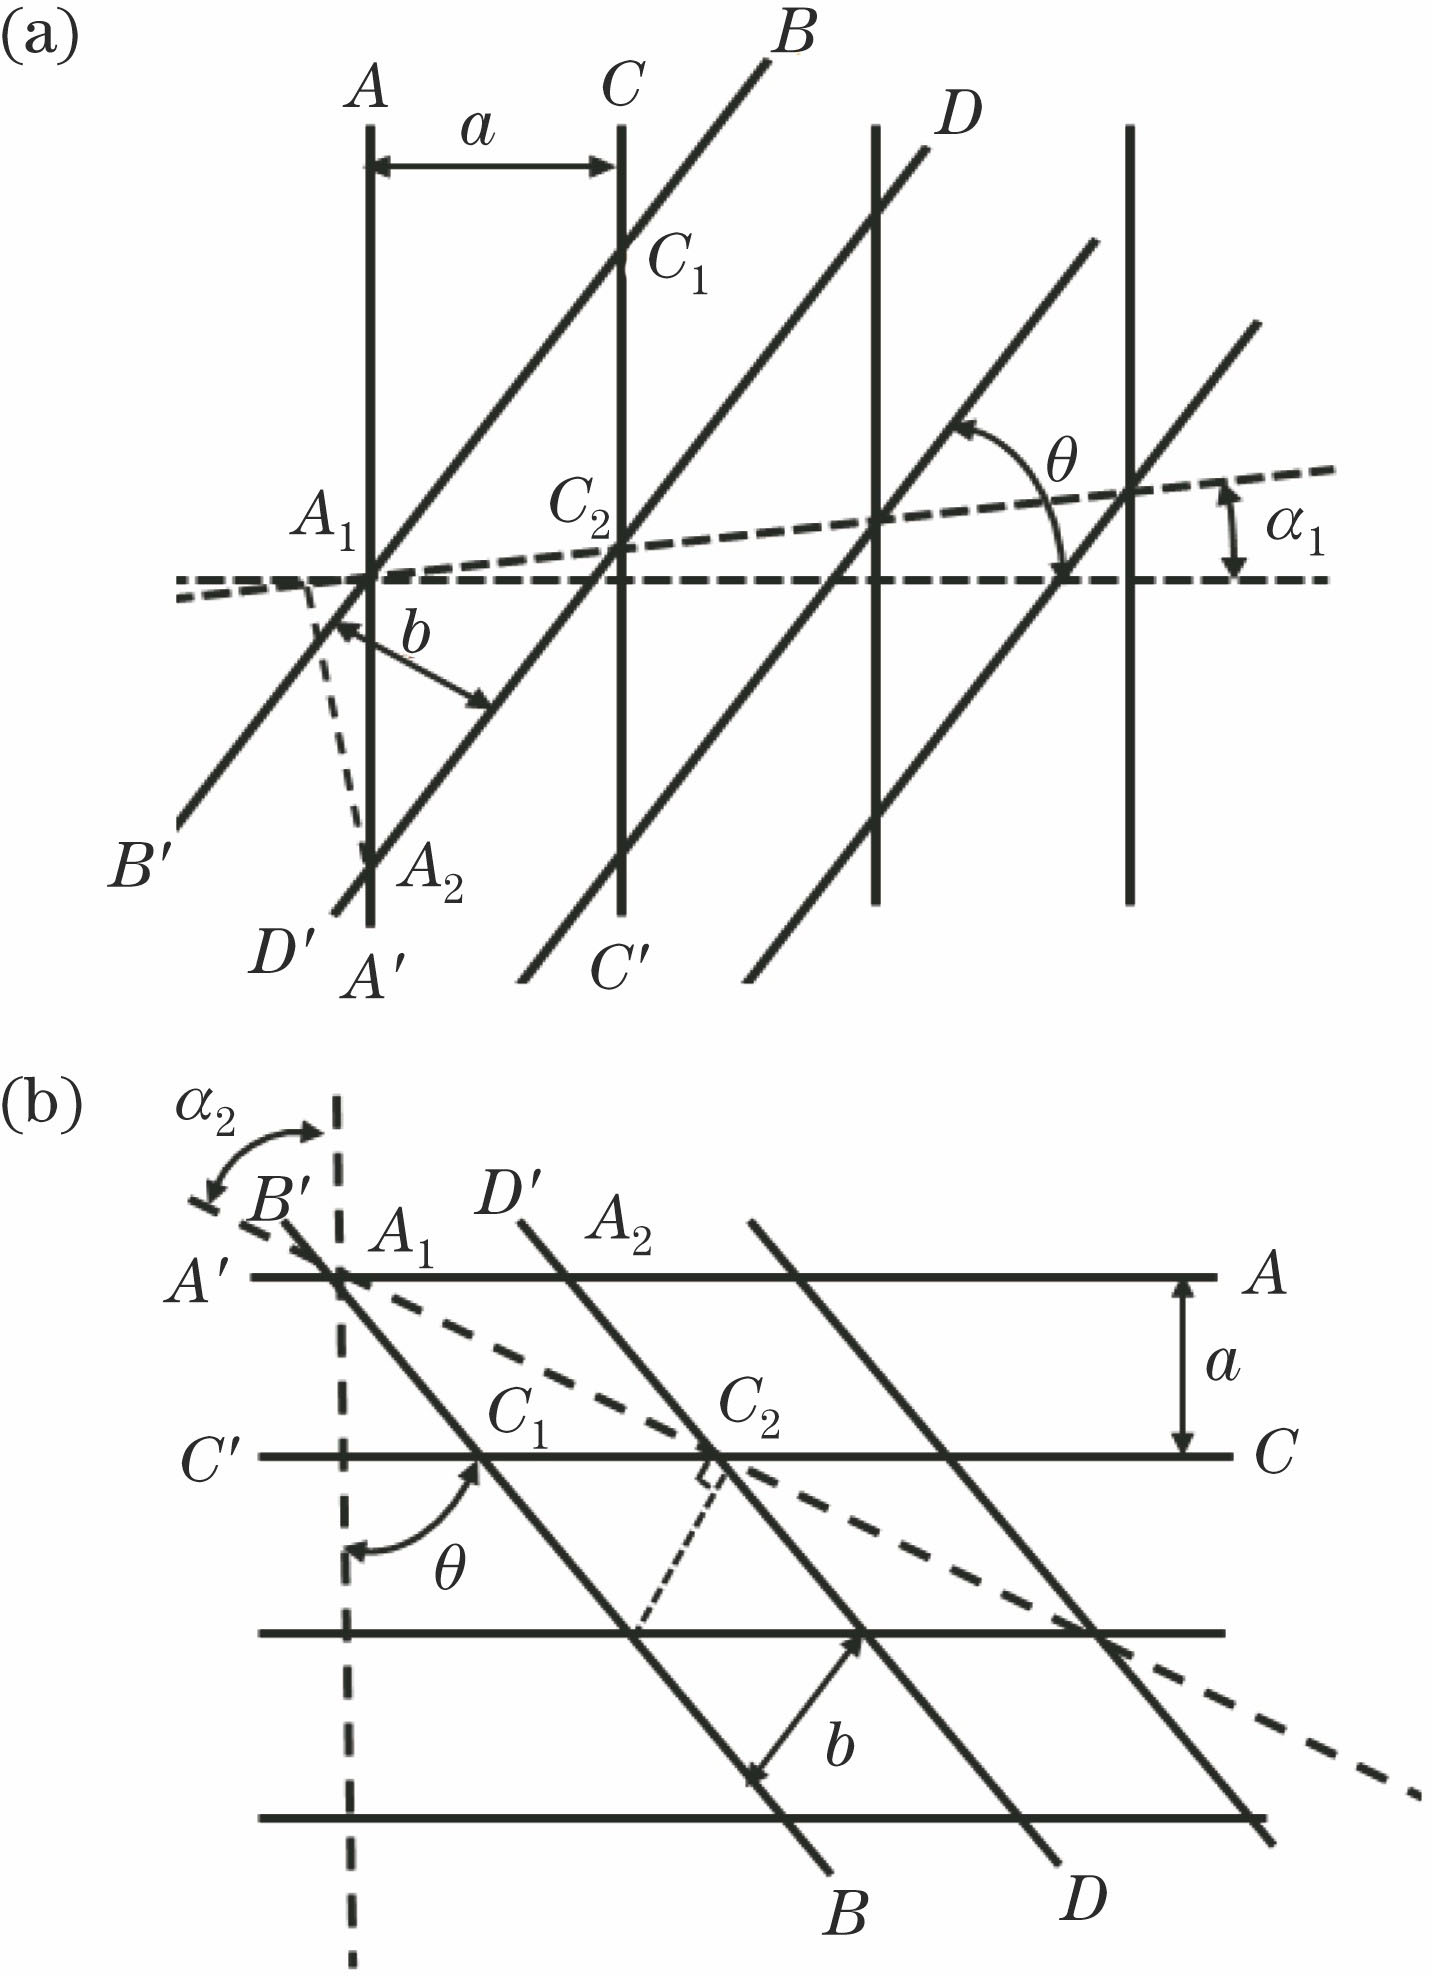 Schematics of moire fringes generated by combination of square aperture micro-lens array and micro-graphic array. (a) First kind of fringe; (b) second kind of fringe